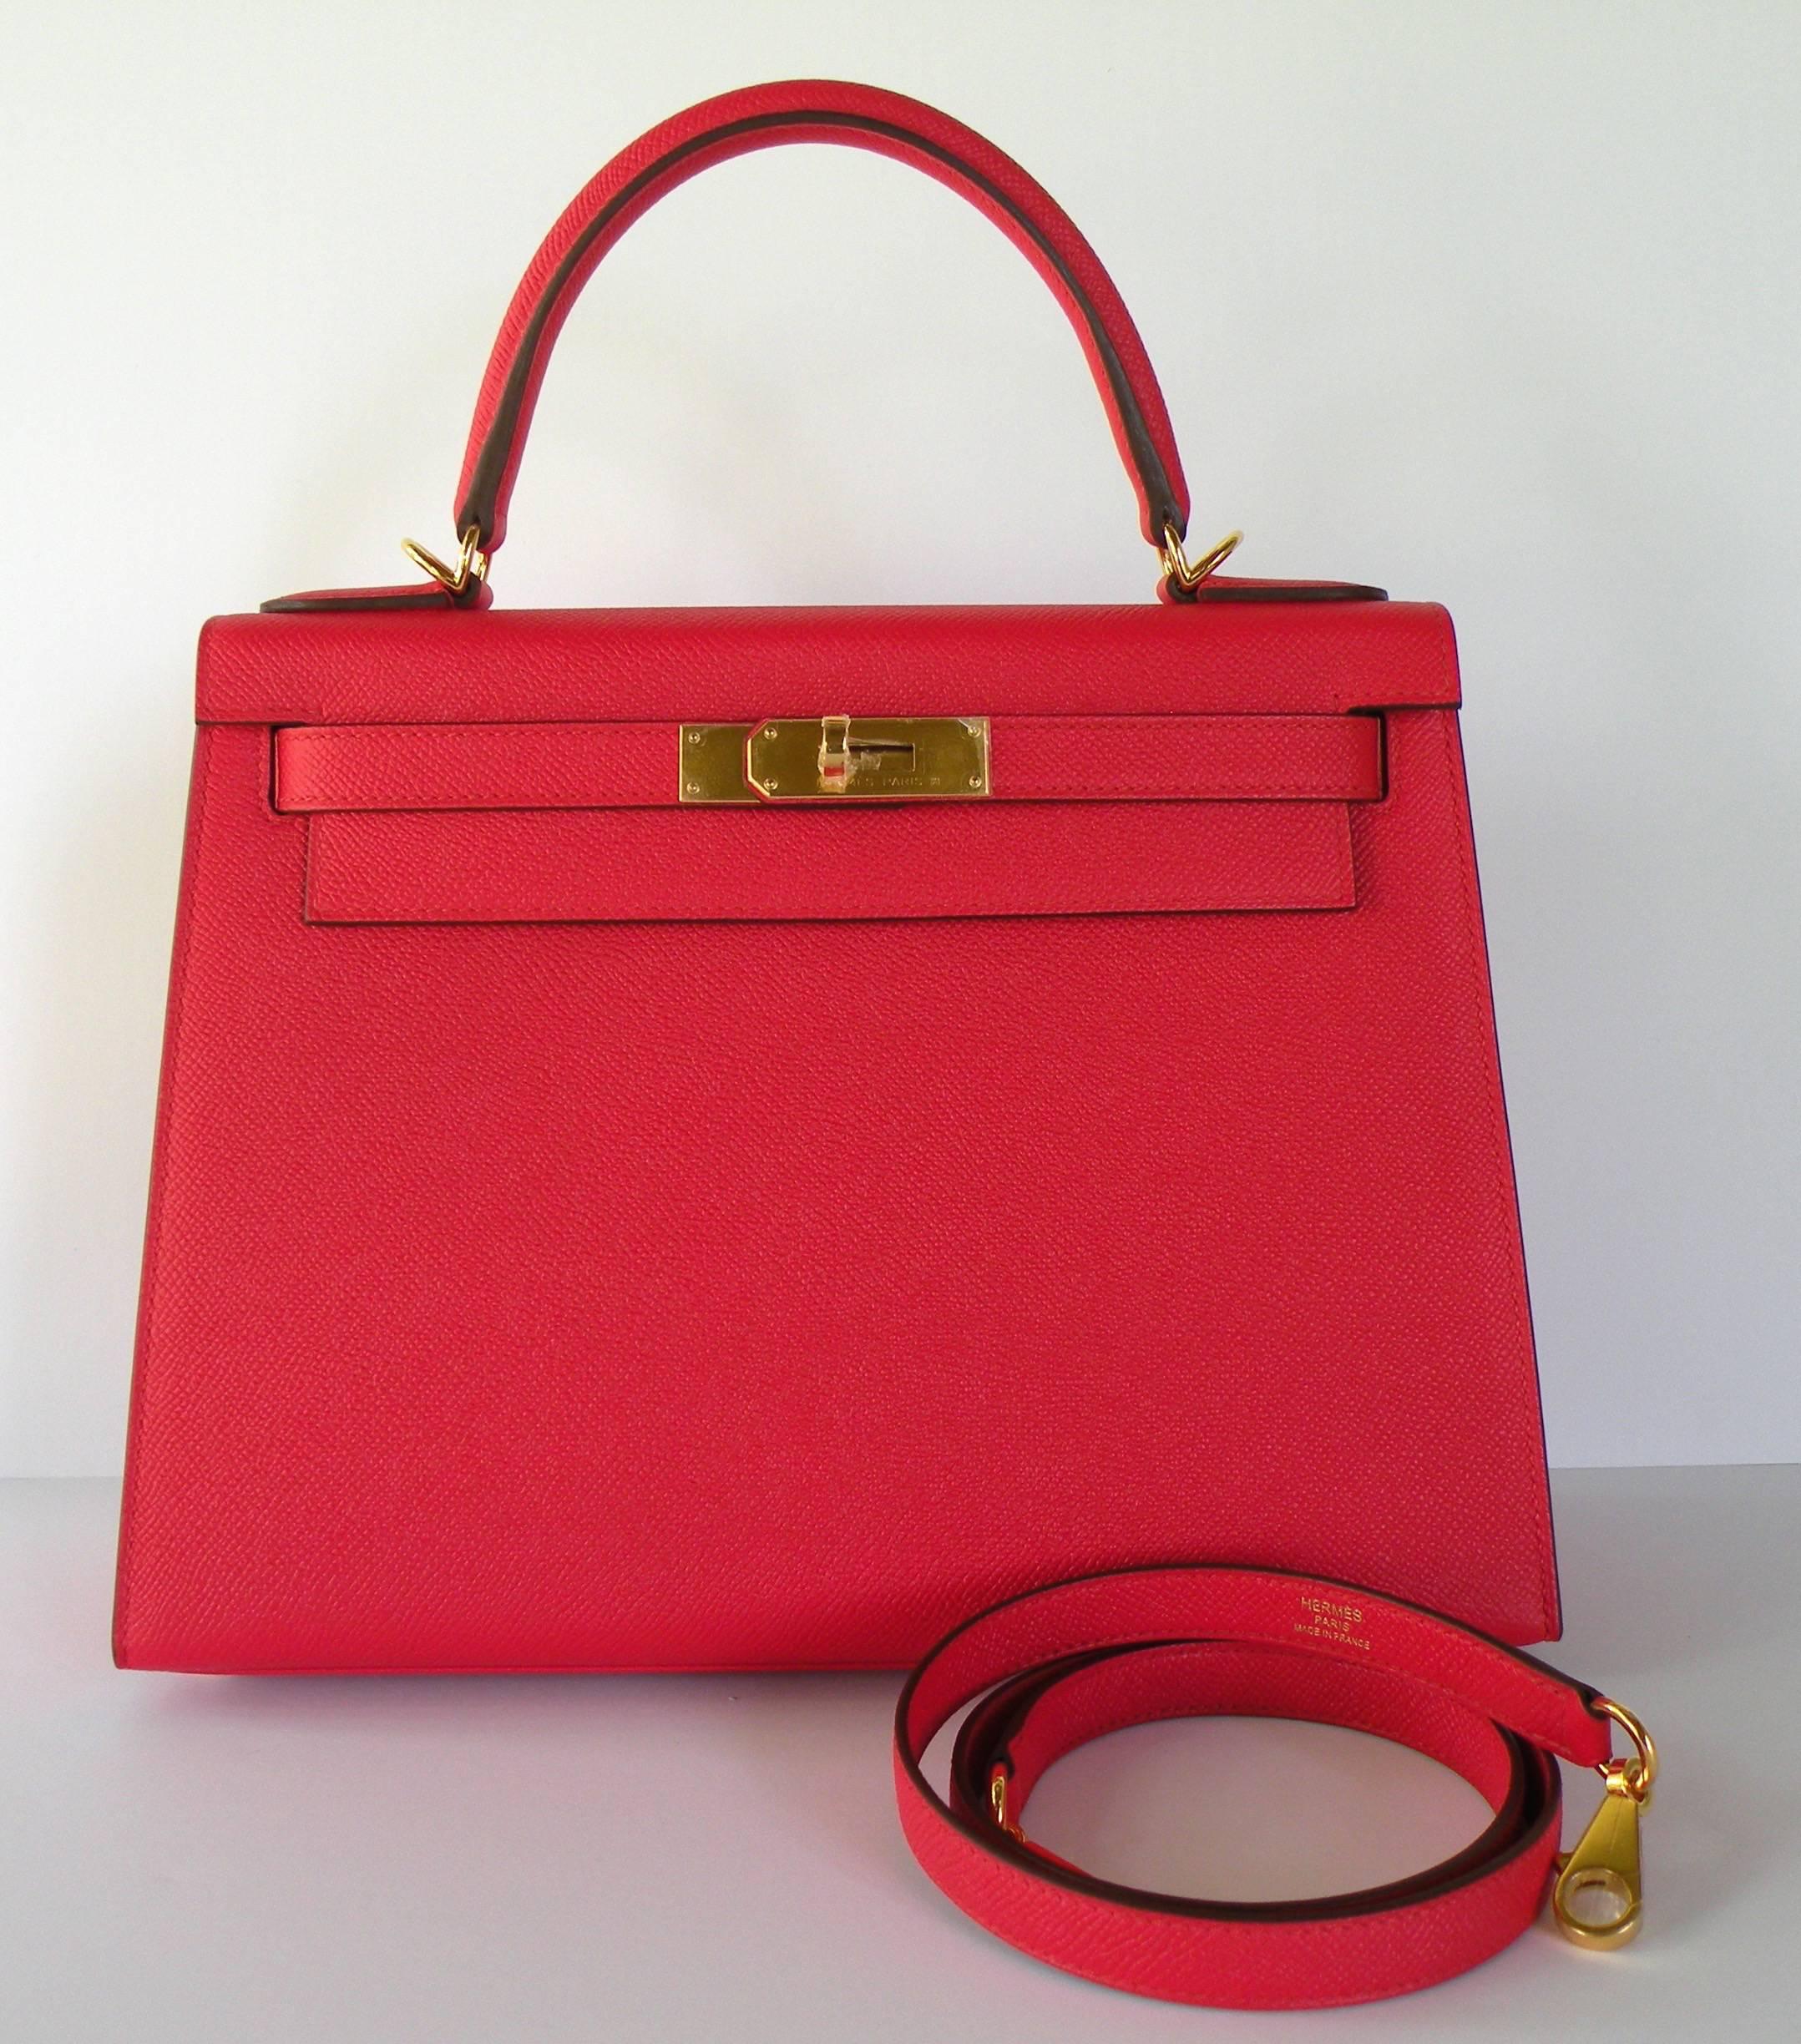 Hermes Kelly 28cm Rouge Tomate Epsom Sellier Kelly 28cm Gold Hardware In New Condition For Sale In West Chester, PA